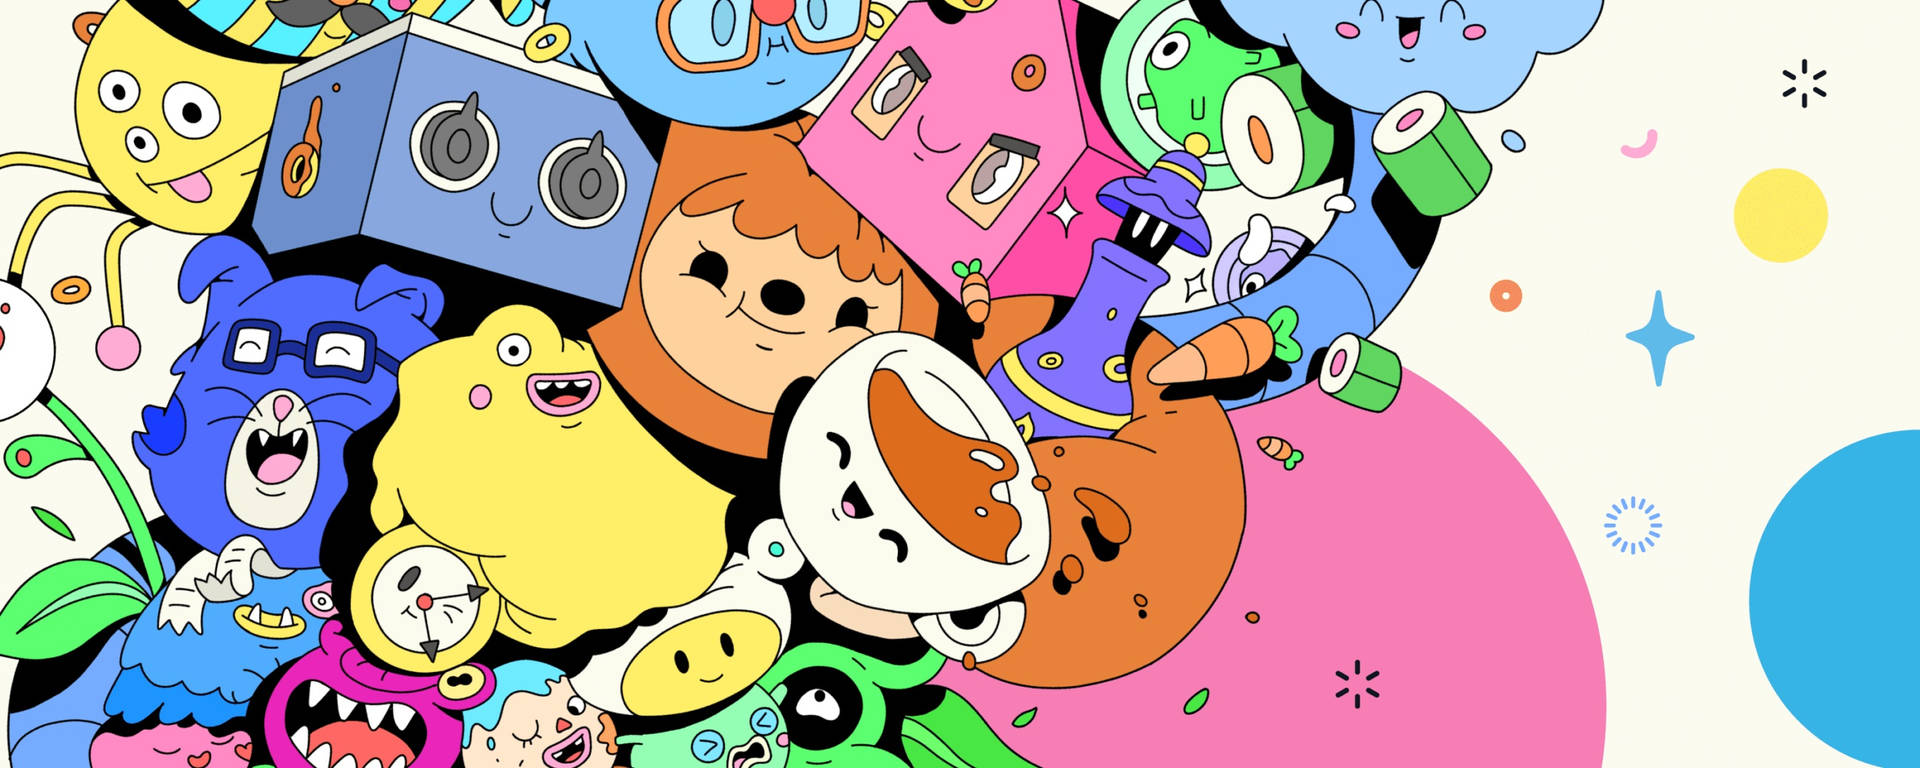 Toca Boca 2600X1040 Wallpaper and Background Image